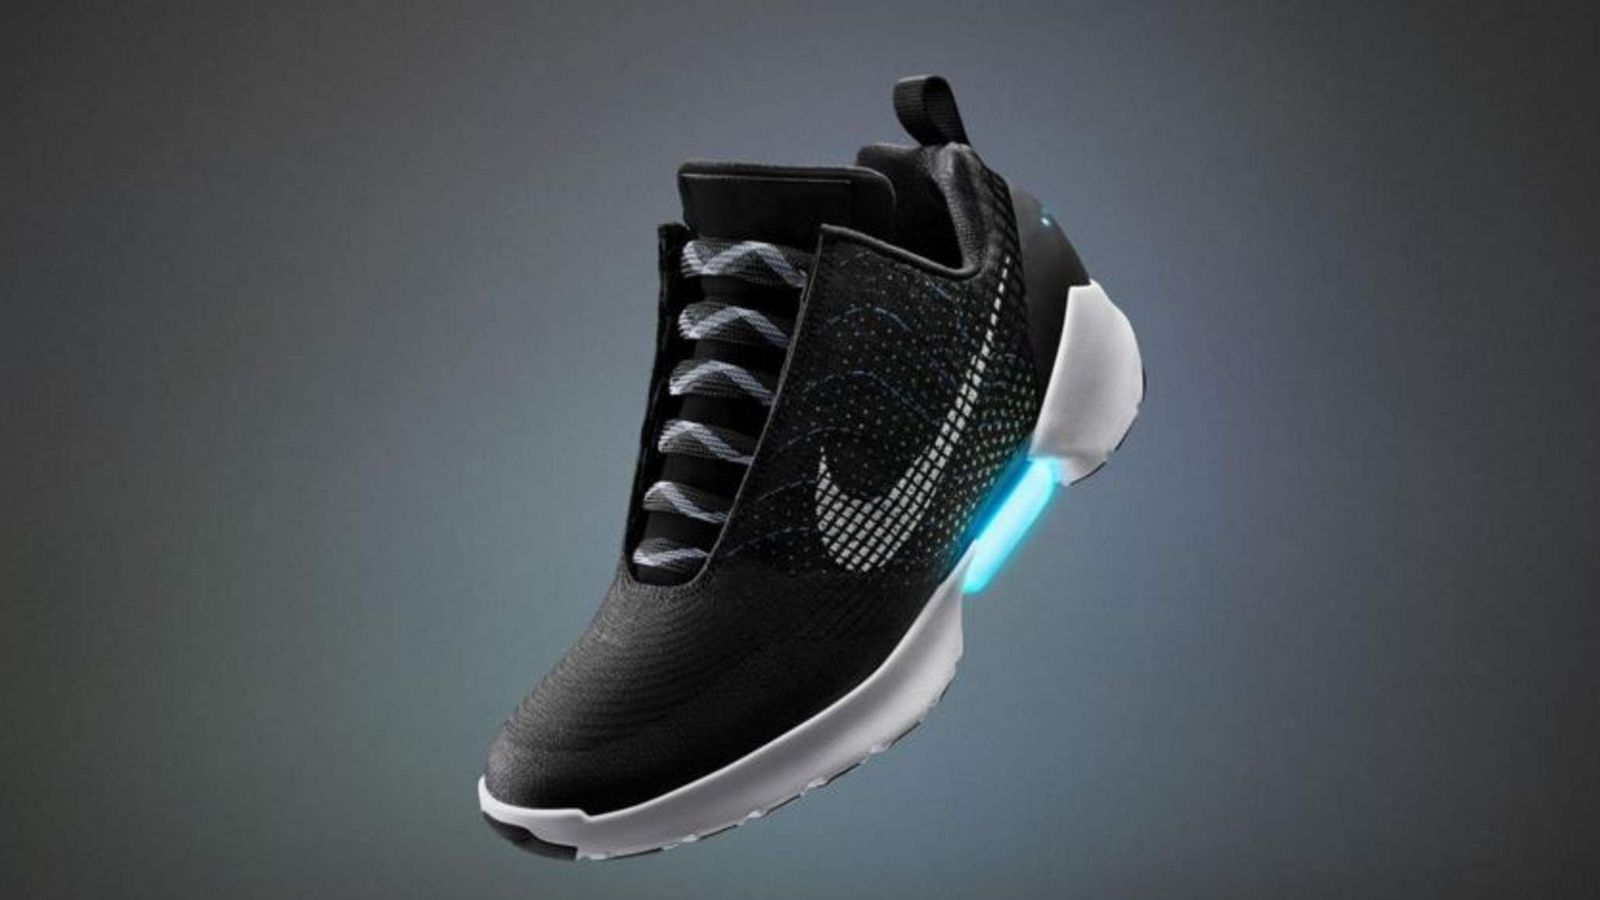 Back To The Future: Self-Tying Shoes Are Here | Science & Tech News ...